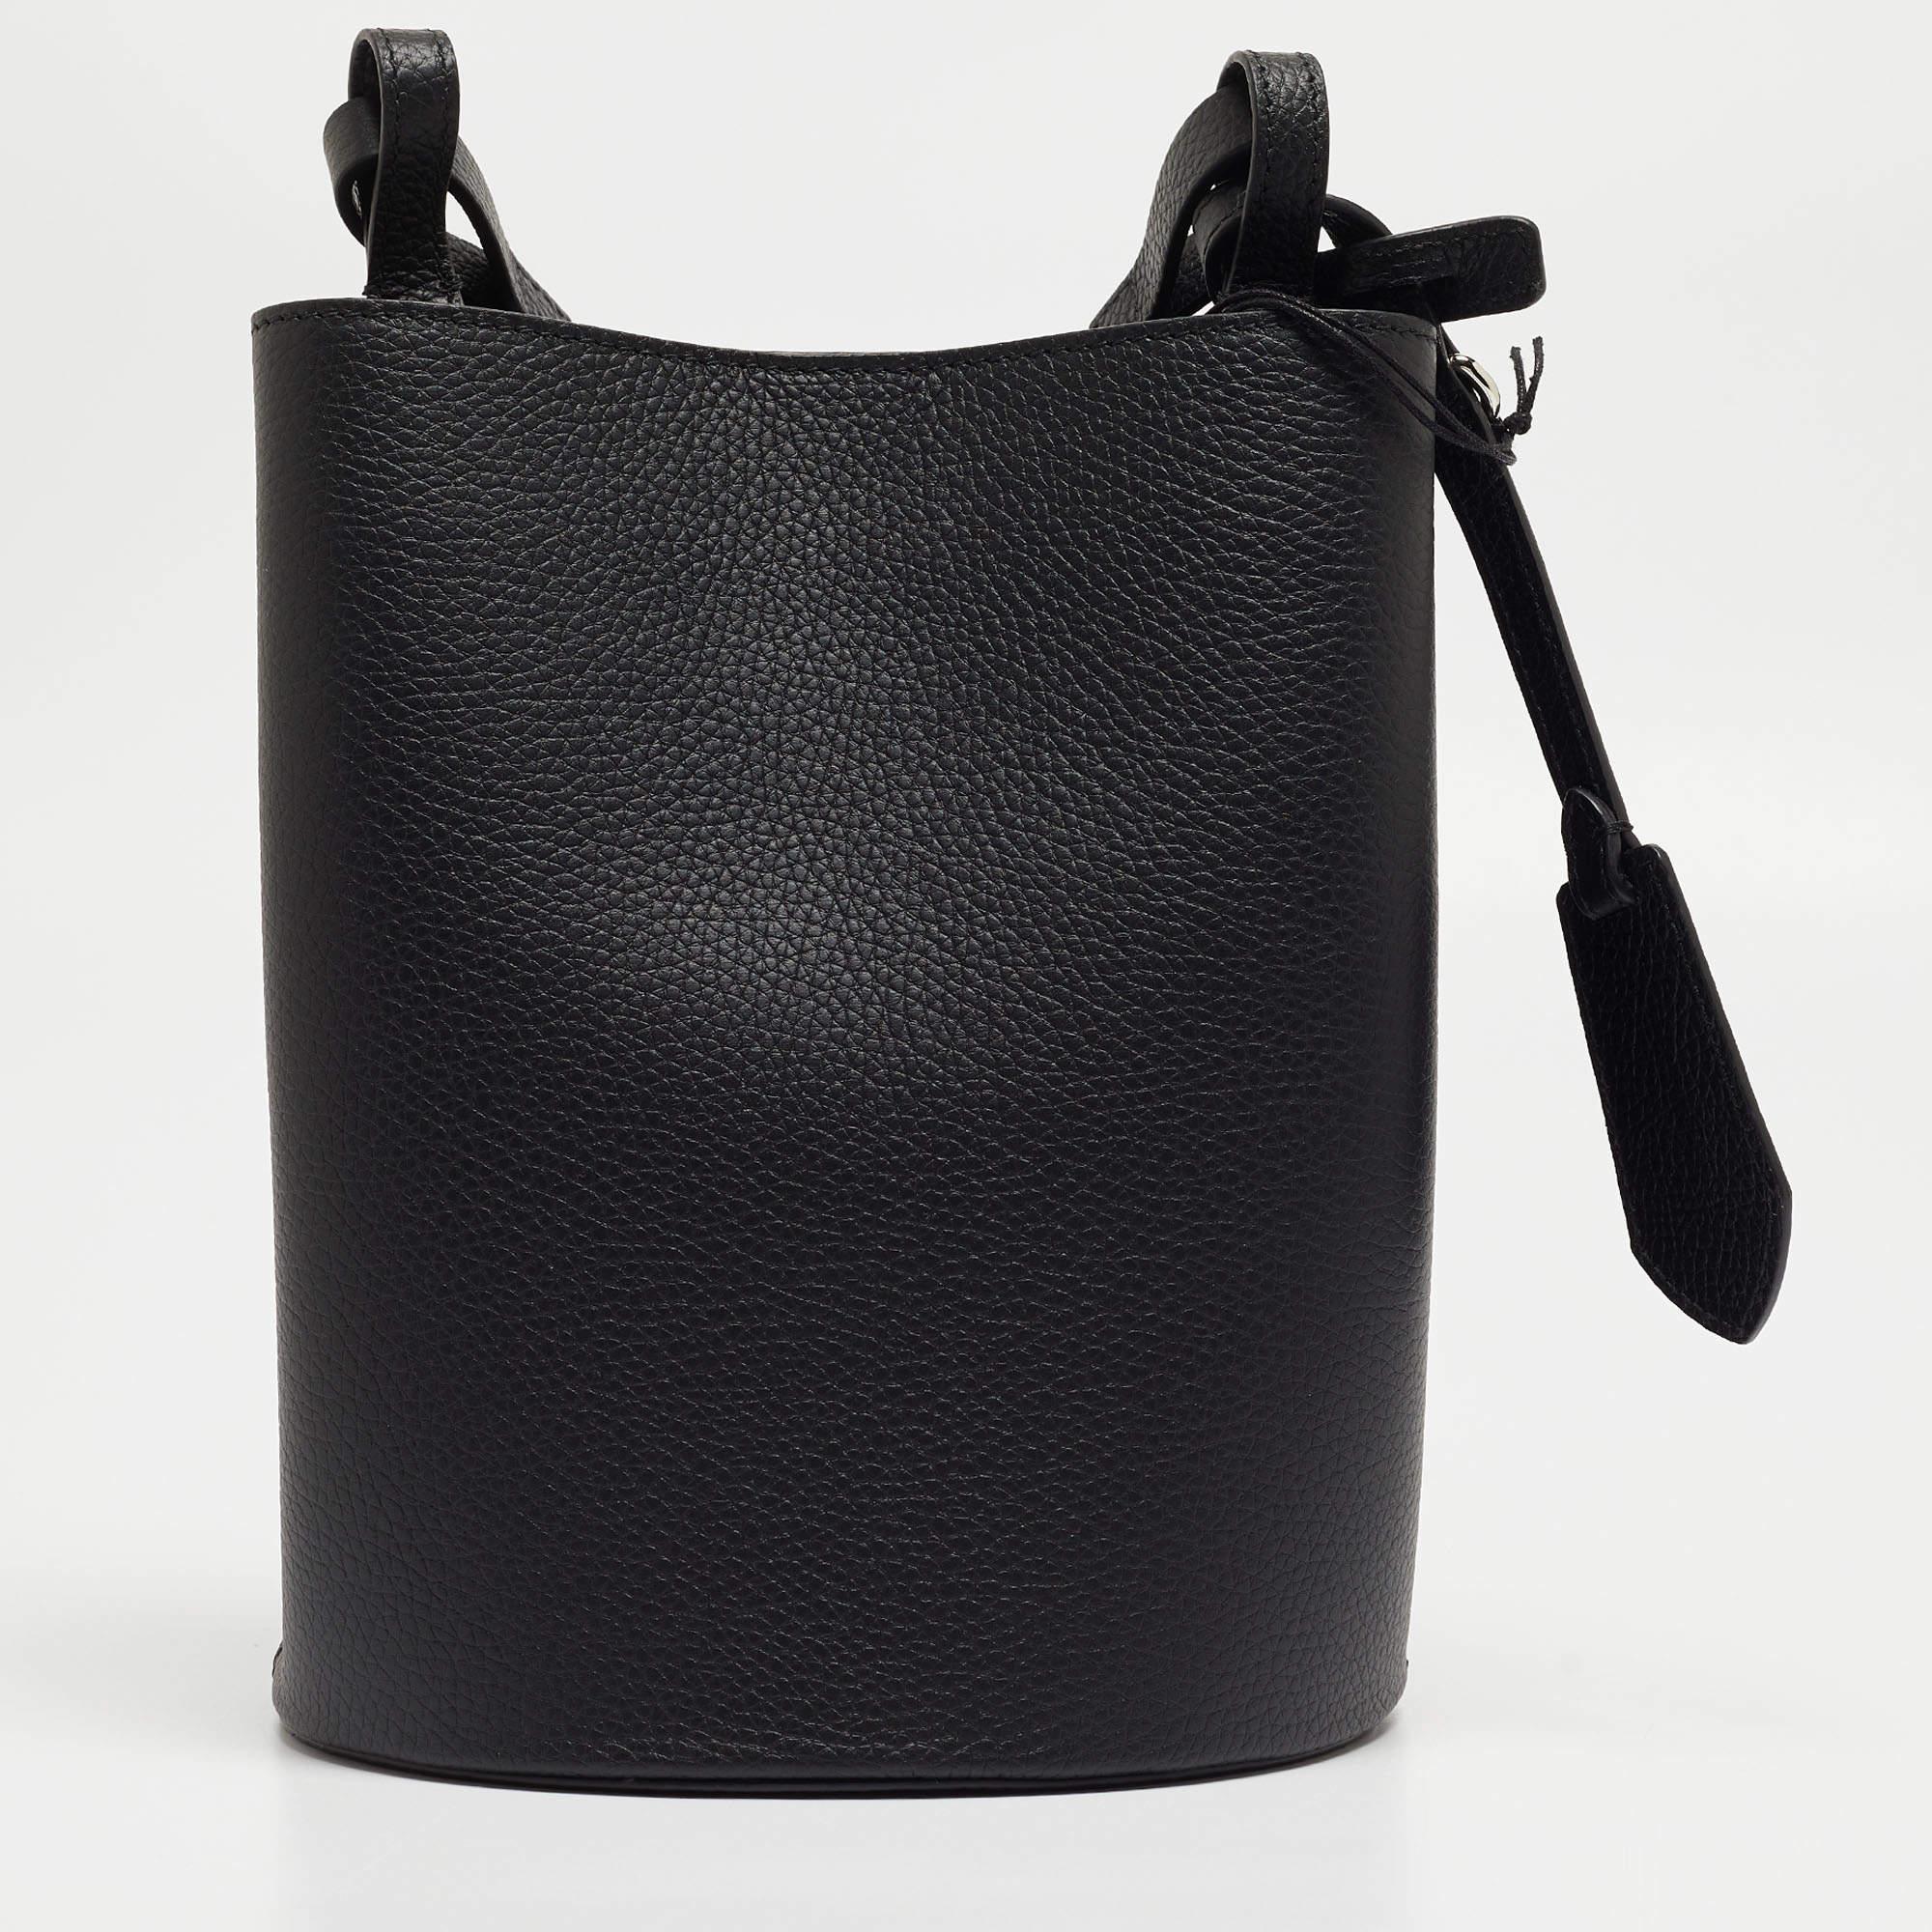 Get style and carry your essentials with ease using this bucket bag by Burberry. It has been crafted from leather and enhanced with silver-tone hardware. A slim strap and front logo complete it.

Includes: Original Dustbag, Info Booklet, Brand Tag

